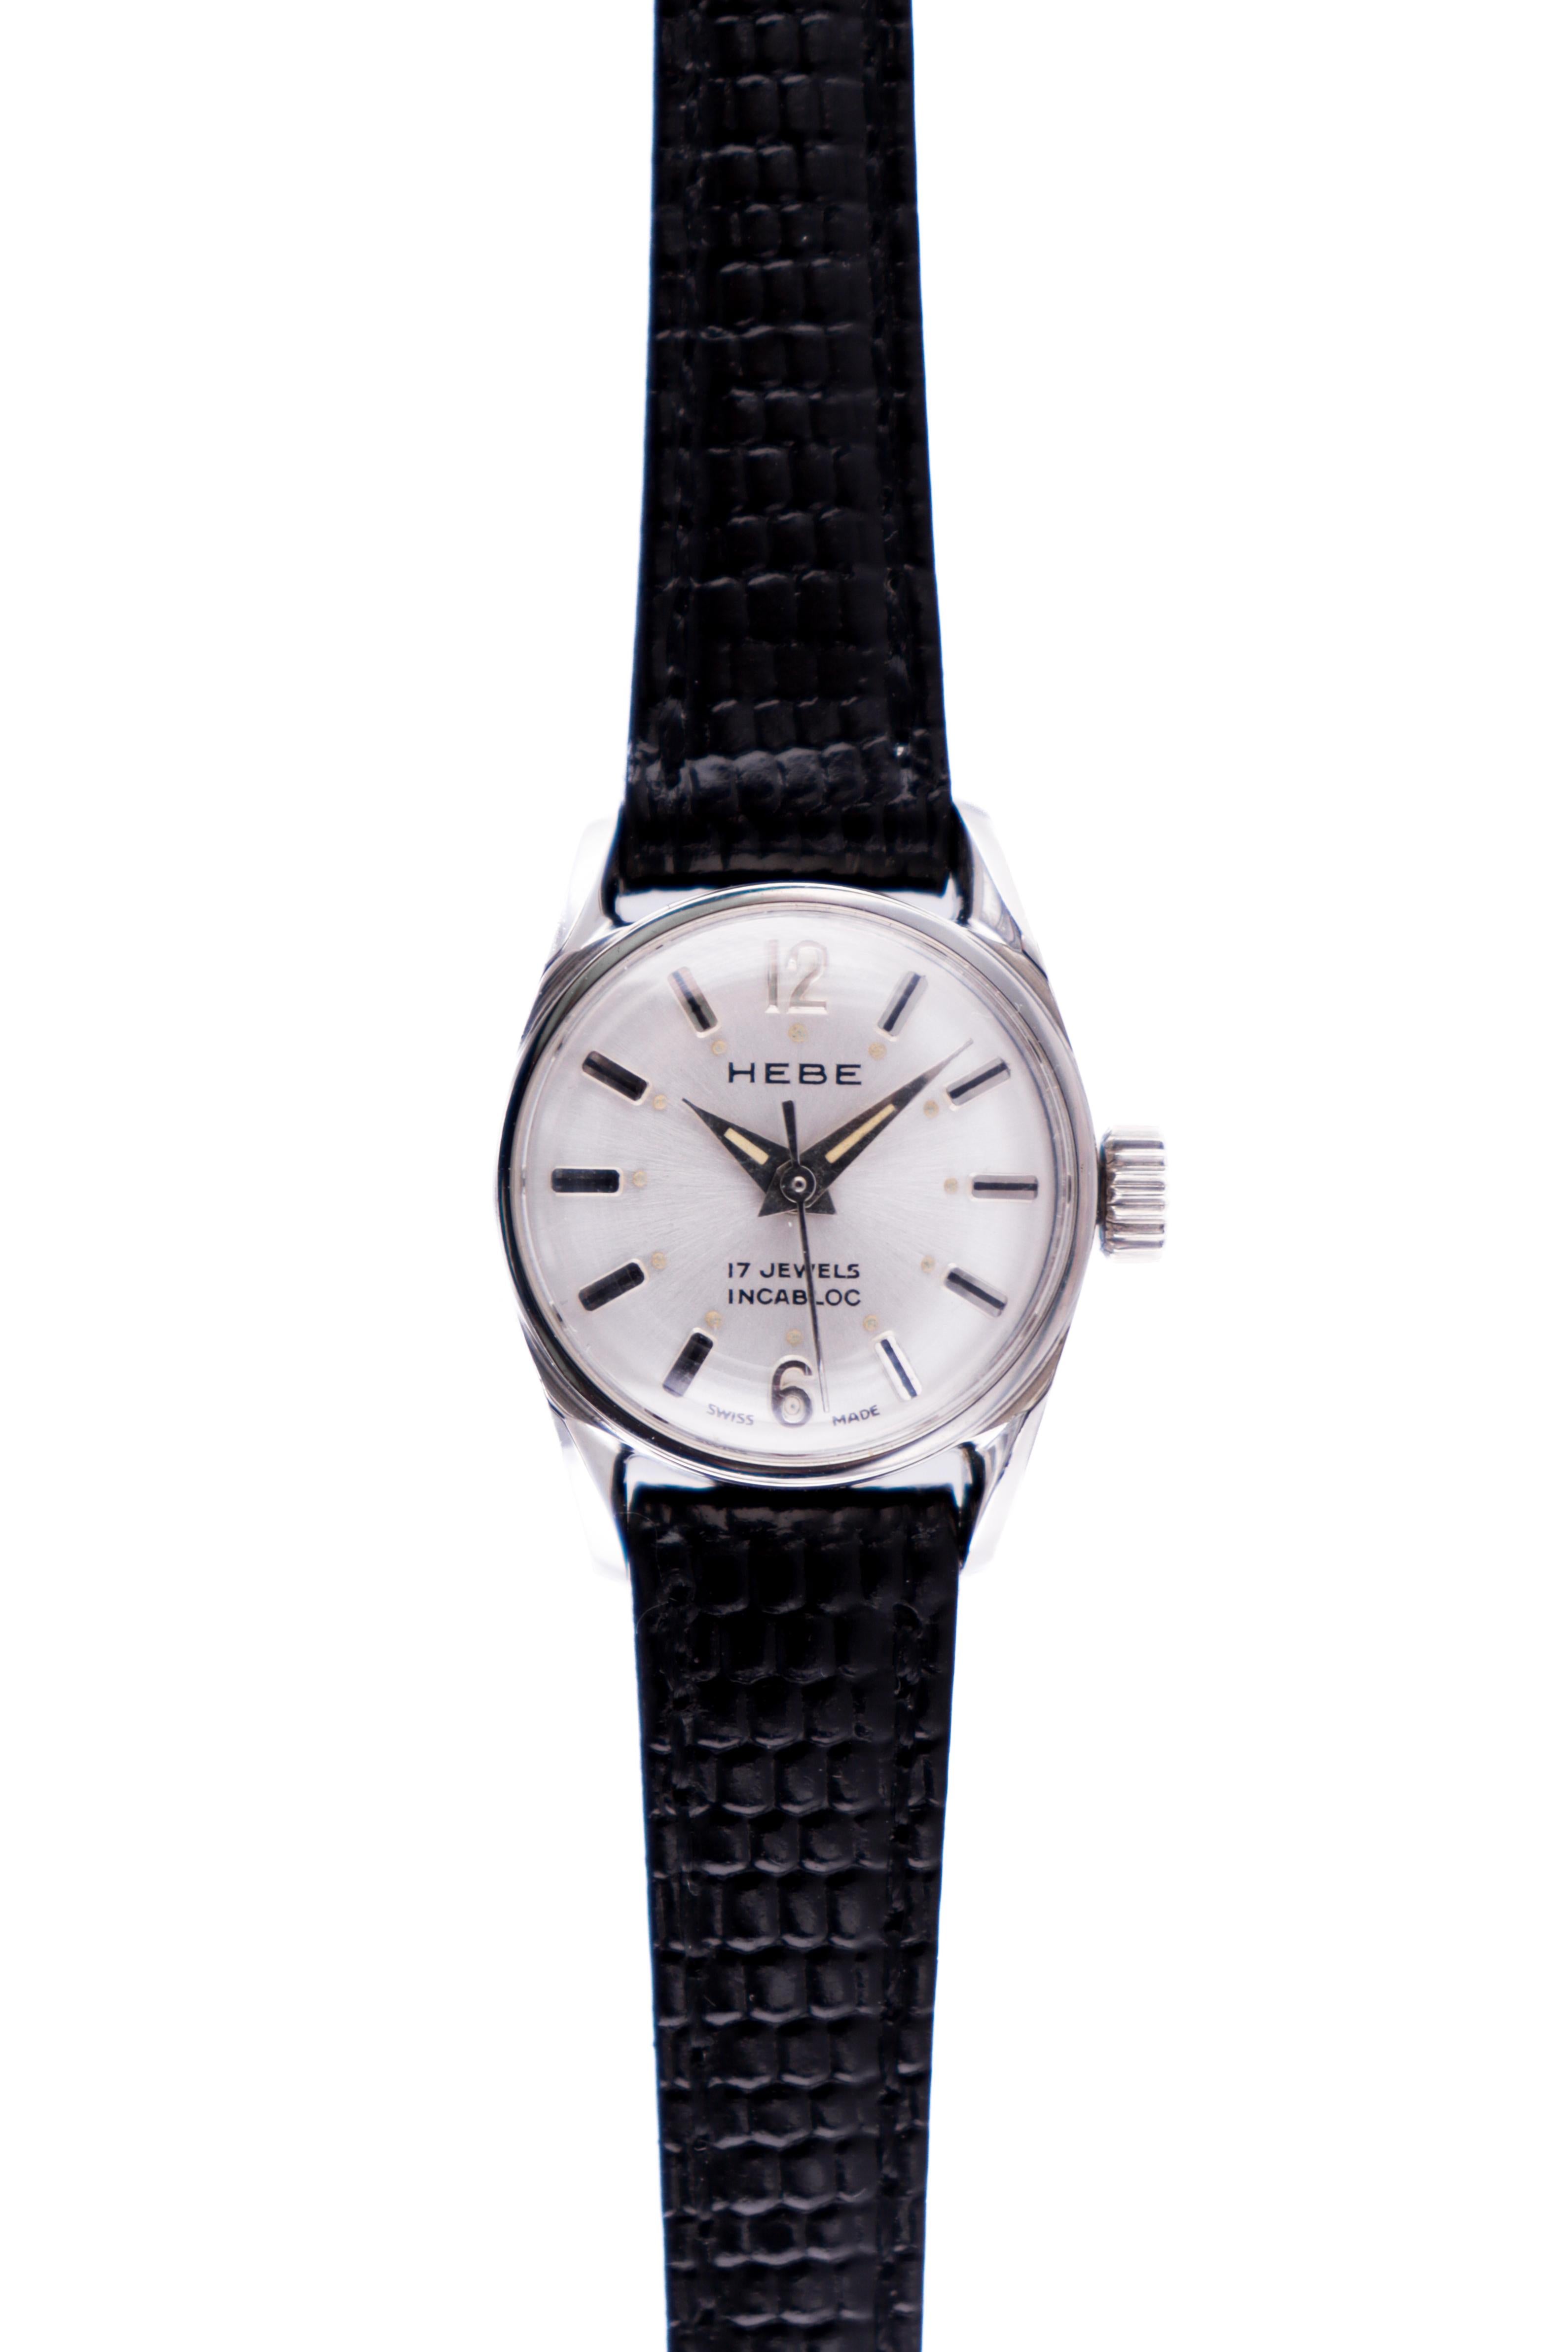 Women's Hebe Stainless Steel New Old Stock Condition Ladies Strap Watch, circa 1960s For Sale